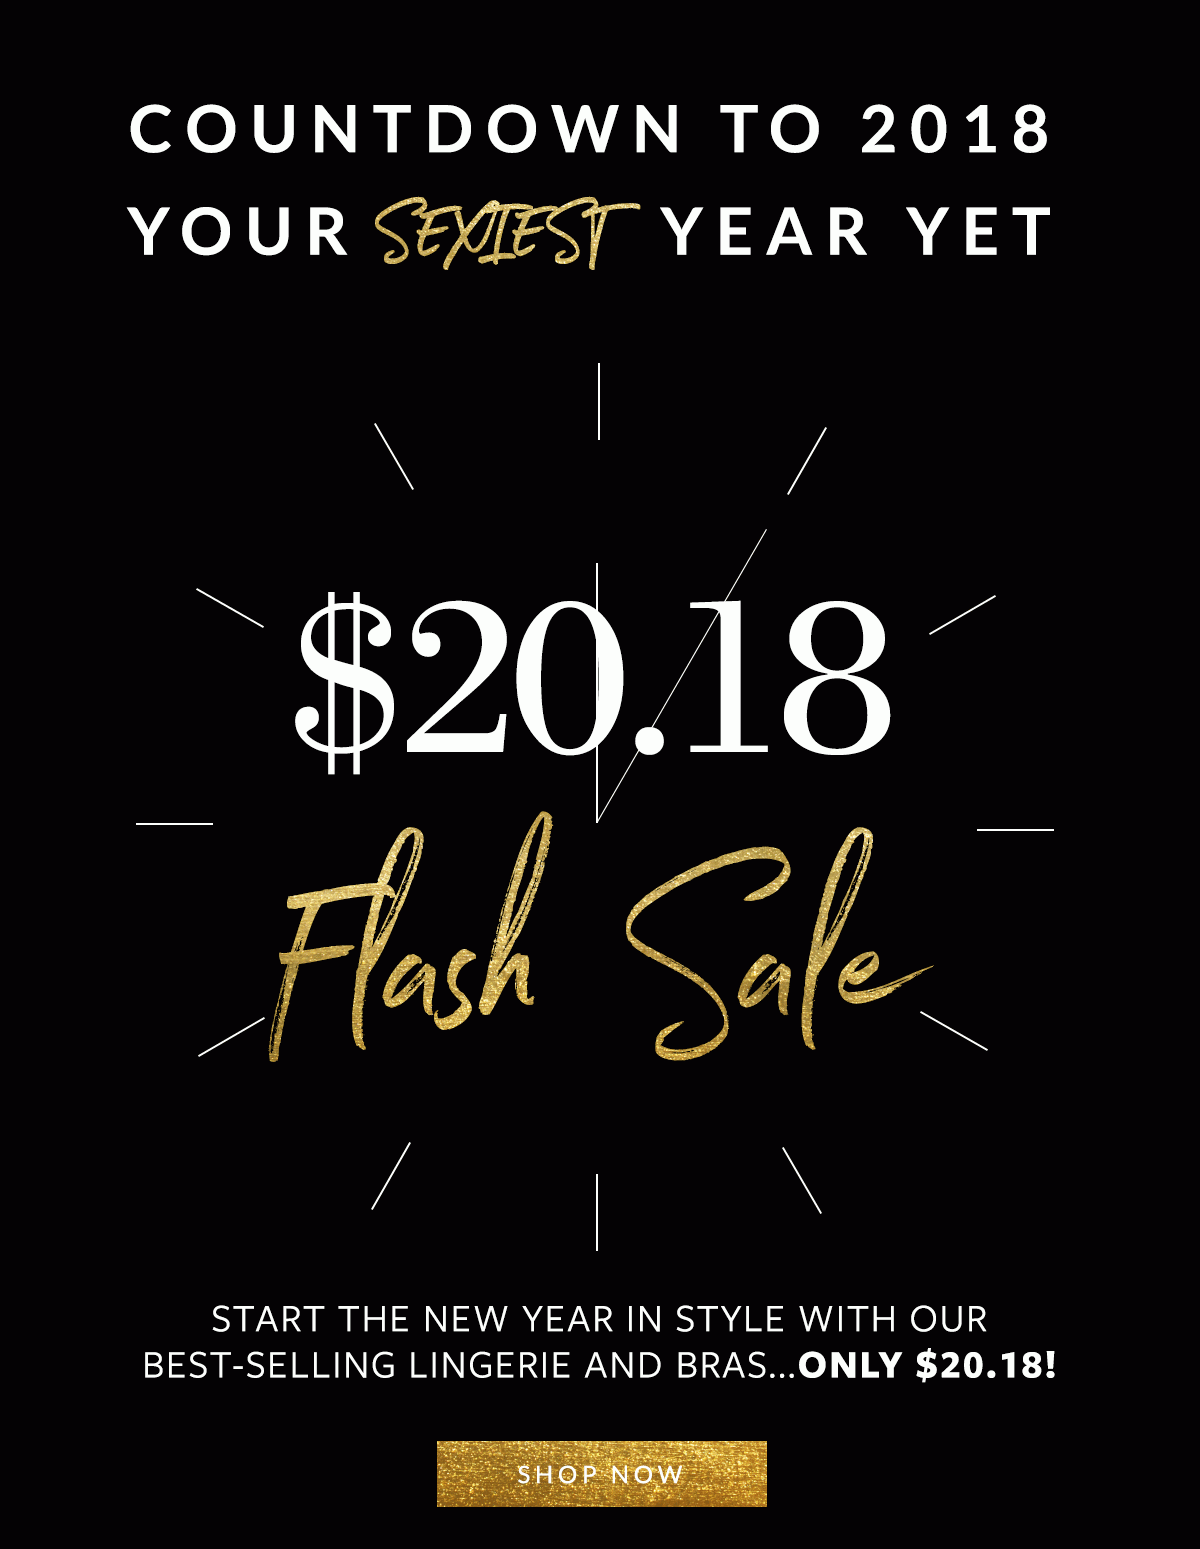 Countdown to 2018 | Your sexiest year yet | $20.18 Flash Sale | Shop Now